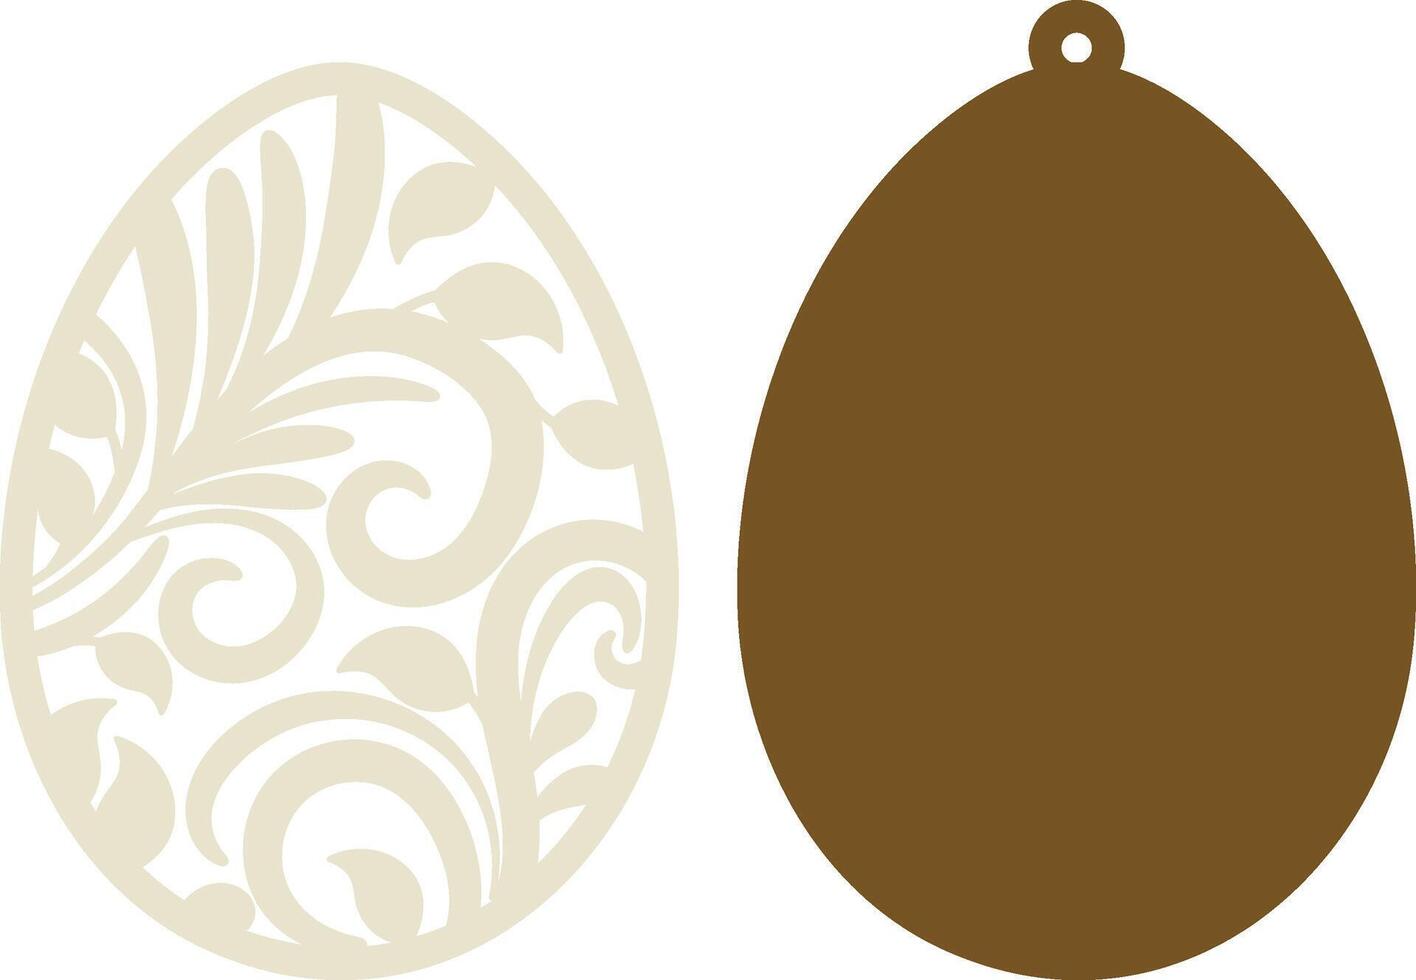 Wood Cut and Paper Cut Easter Egg Template vector